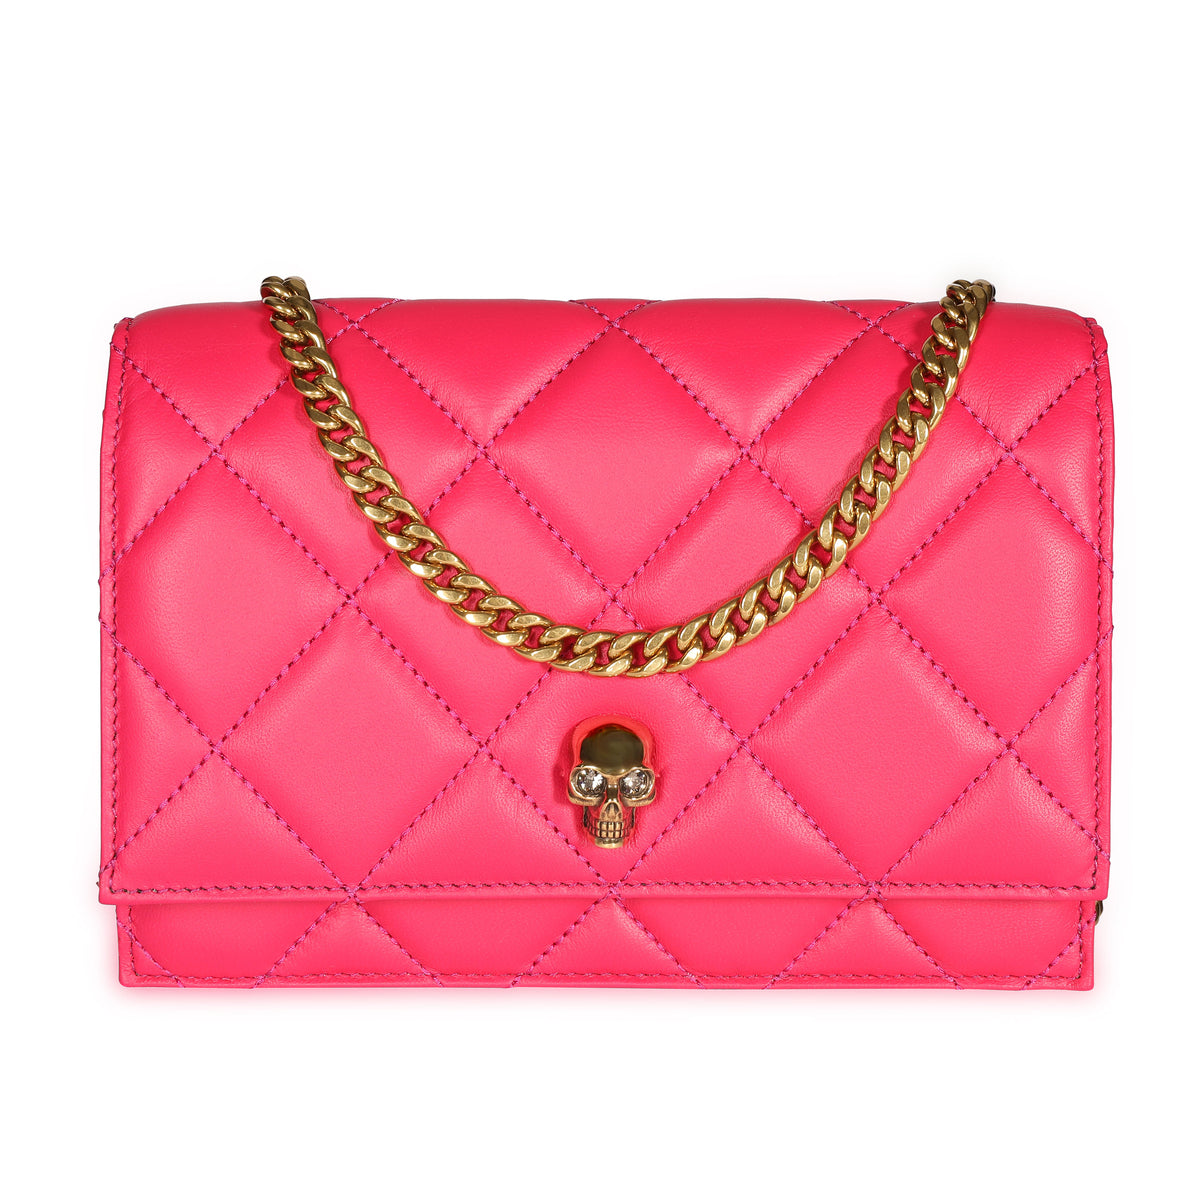 Alexander McQueen Hot Pink Quilted Leather Mini Skull Crossbody Bag